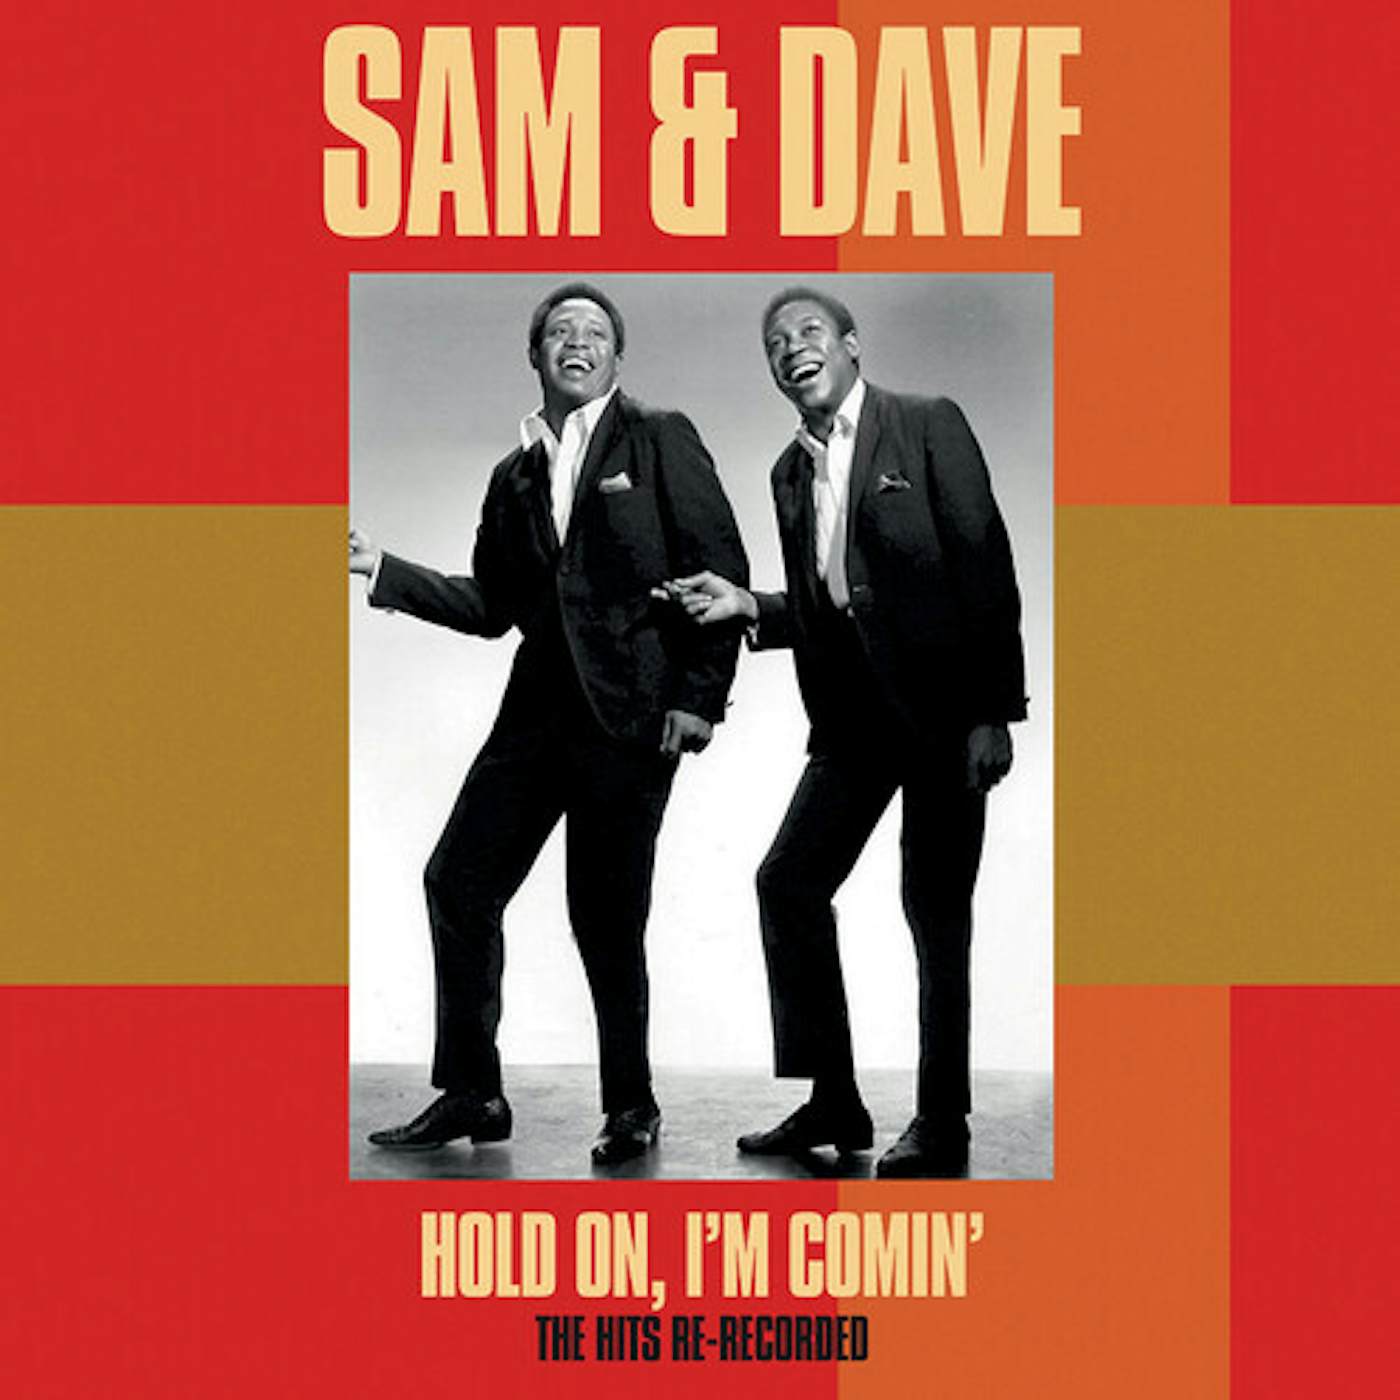 Sam & Dave HOLD ON I'M COMIN': THE HITS RE-RECORDED CD